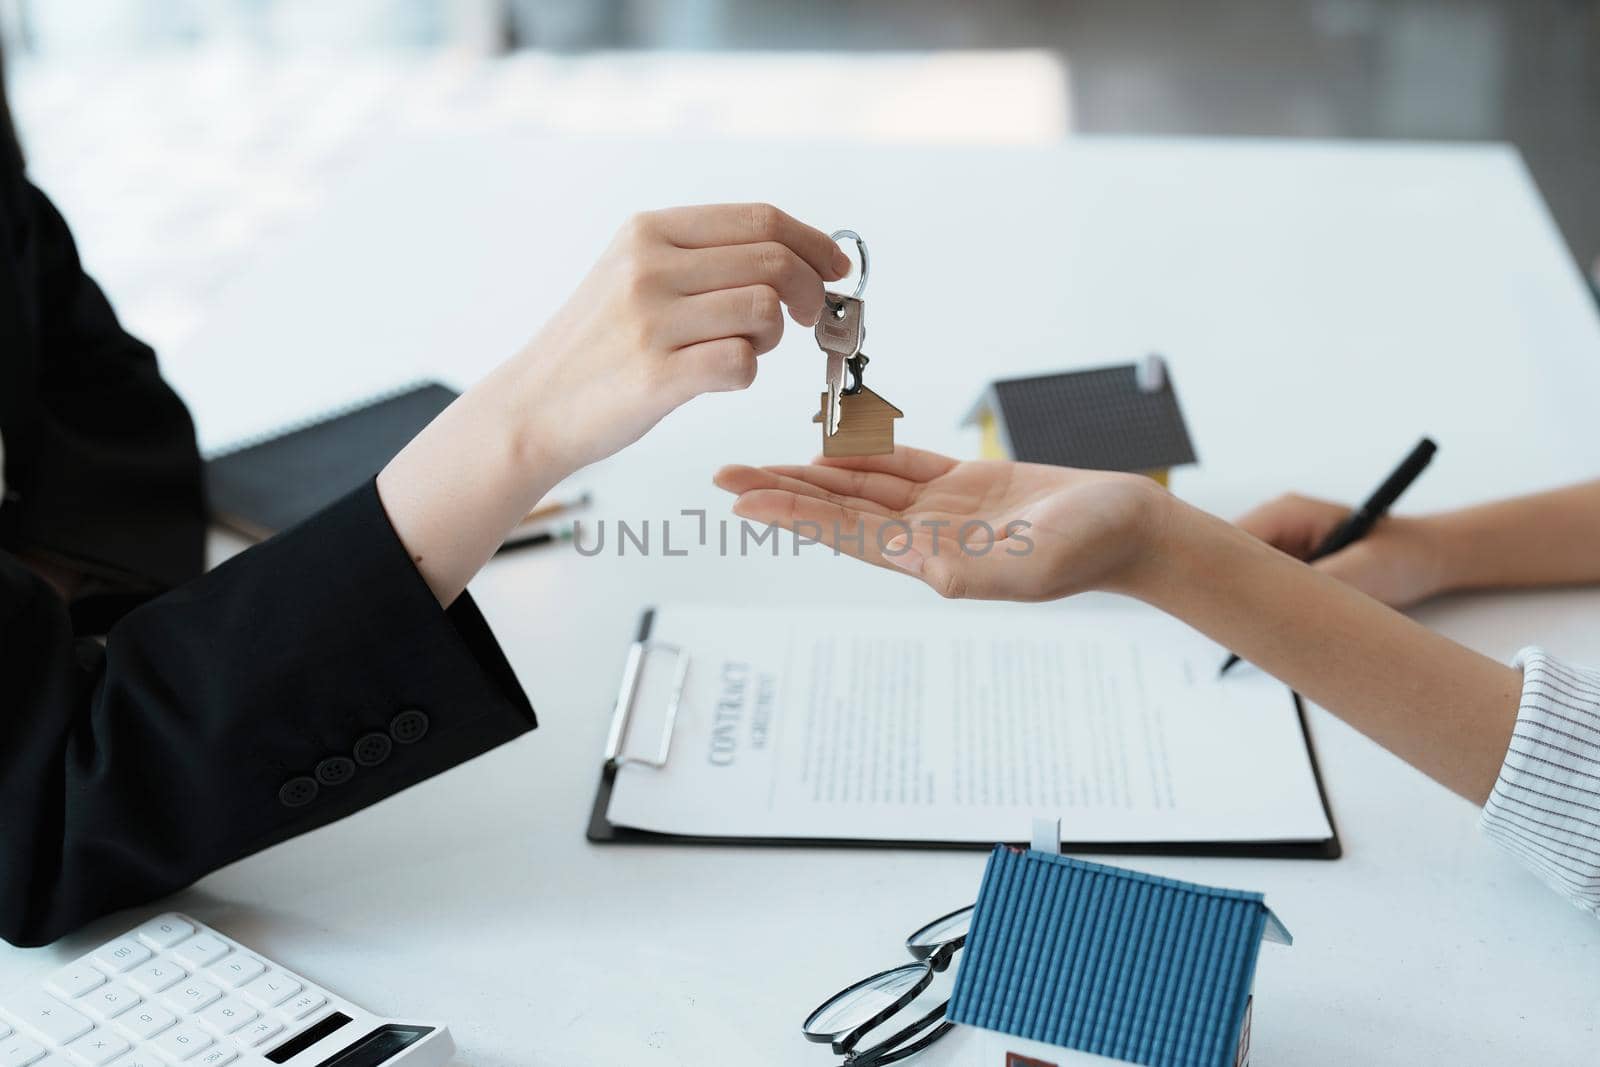 Accountant, businessman, real estate agent, Asian business woman handing keys to customers along with house after customers to sign.